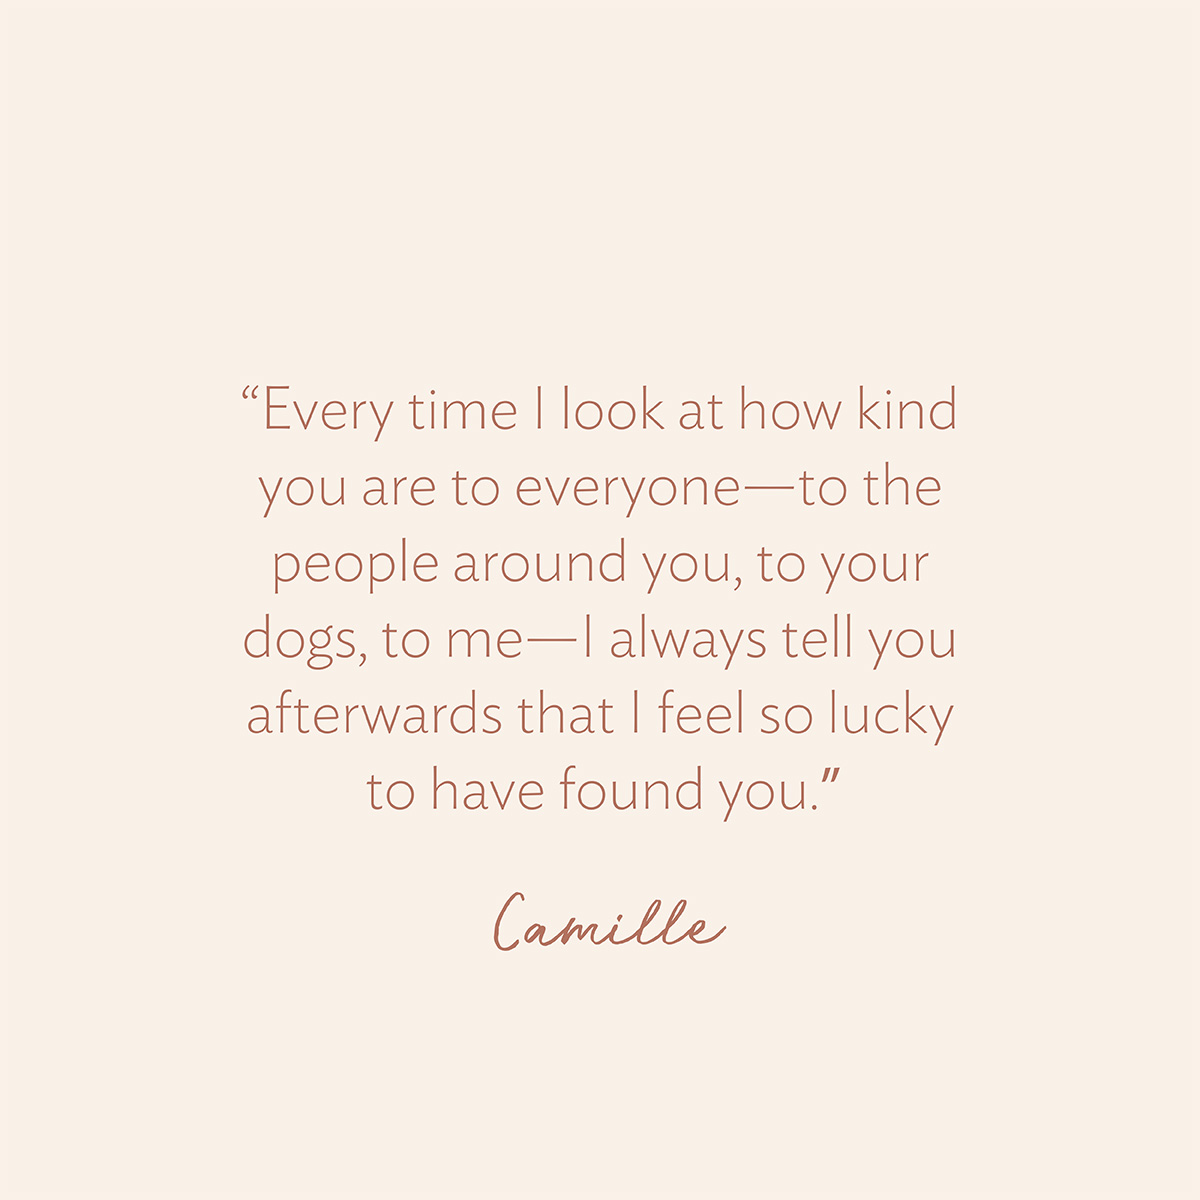 “Every time I look at how kind you are to everyone—to the people around you, to your dogs, to me—I always tell you afterwards that I feel so lucky to have found you.” - Camille